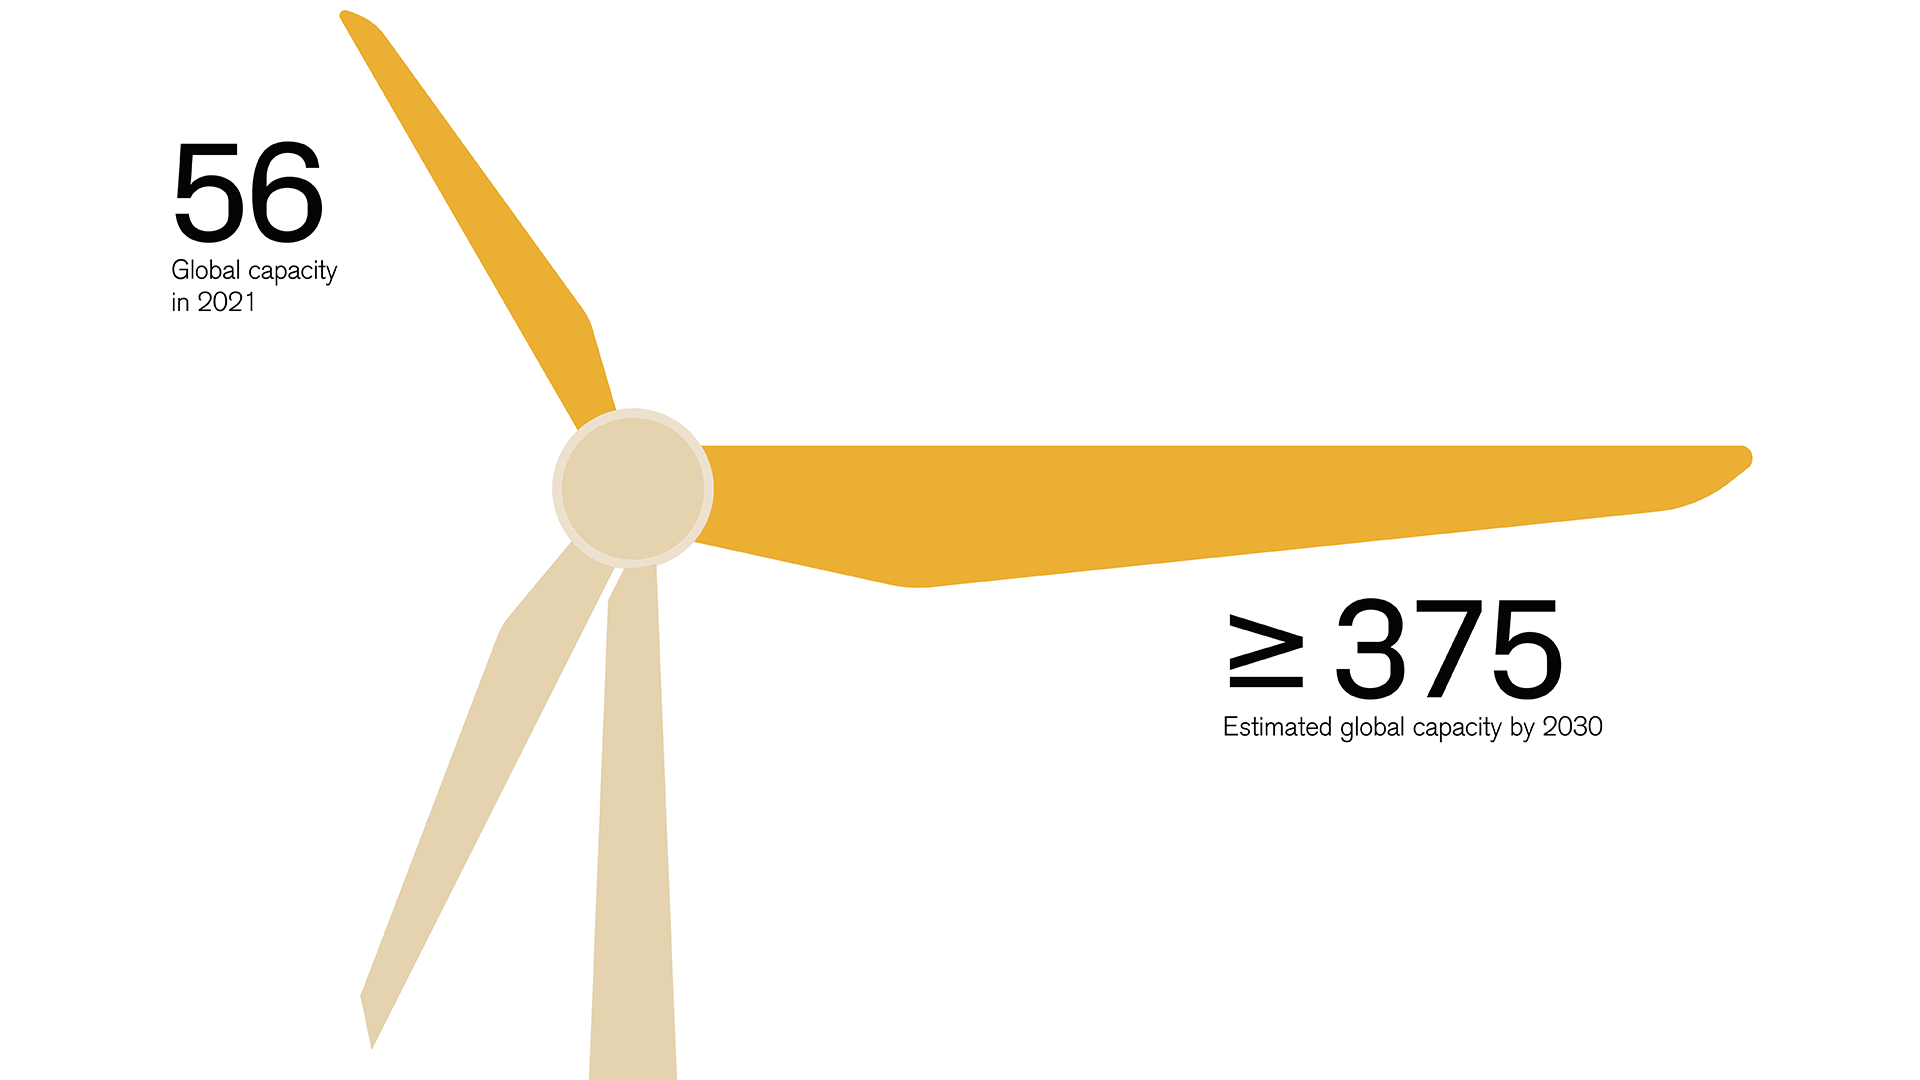 Renewable energy: Offshore wind power by 2030